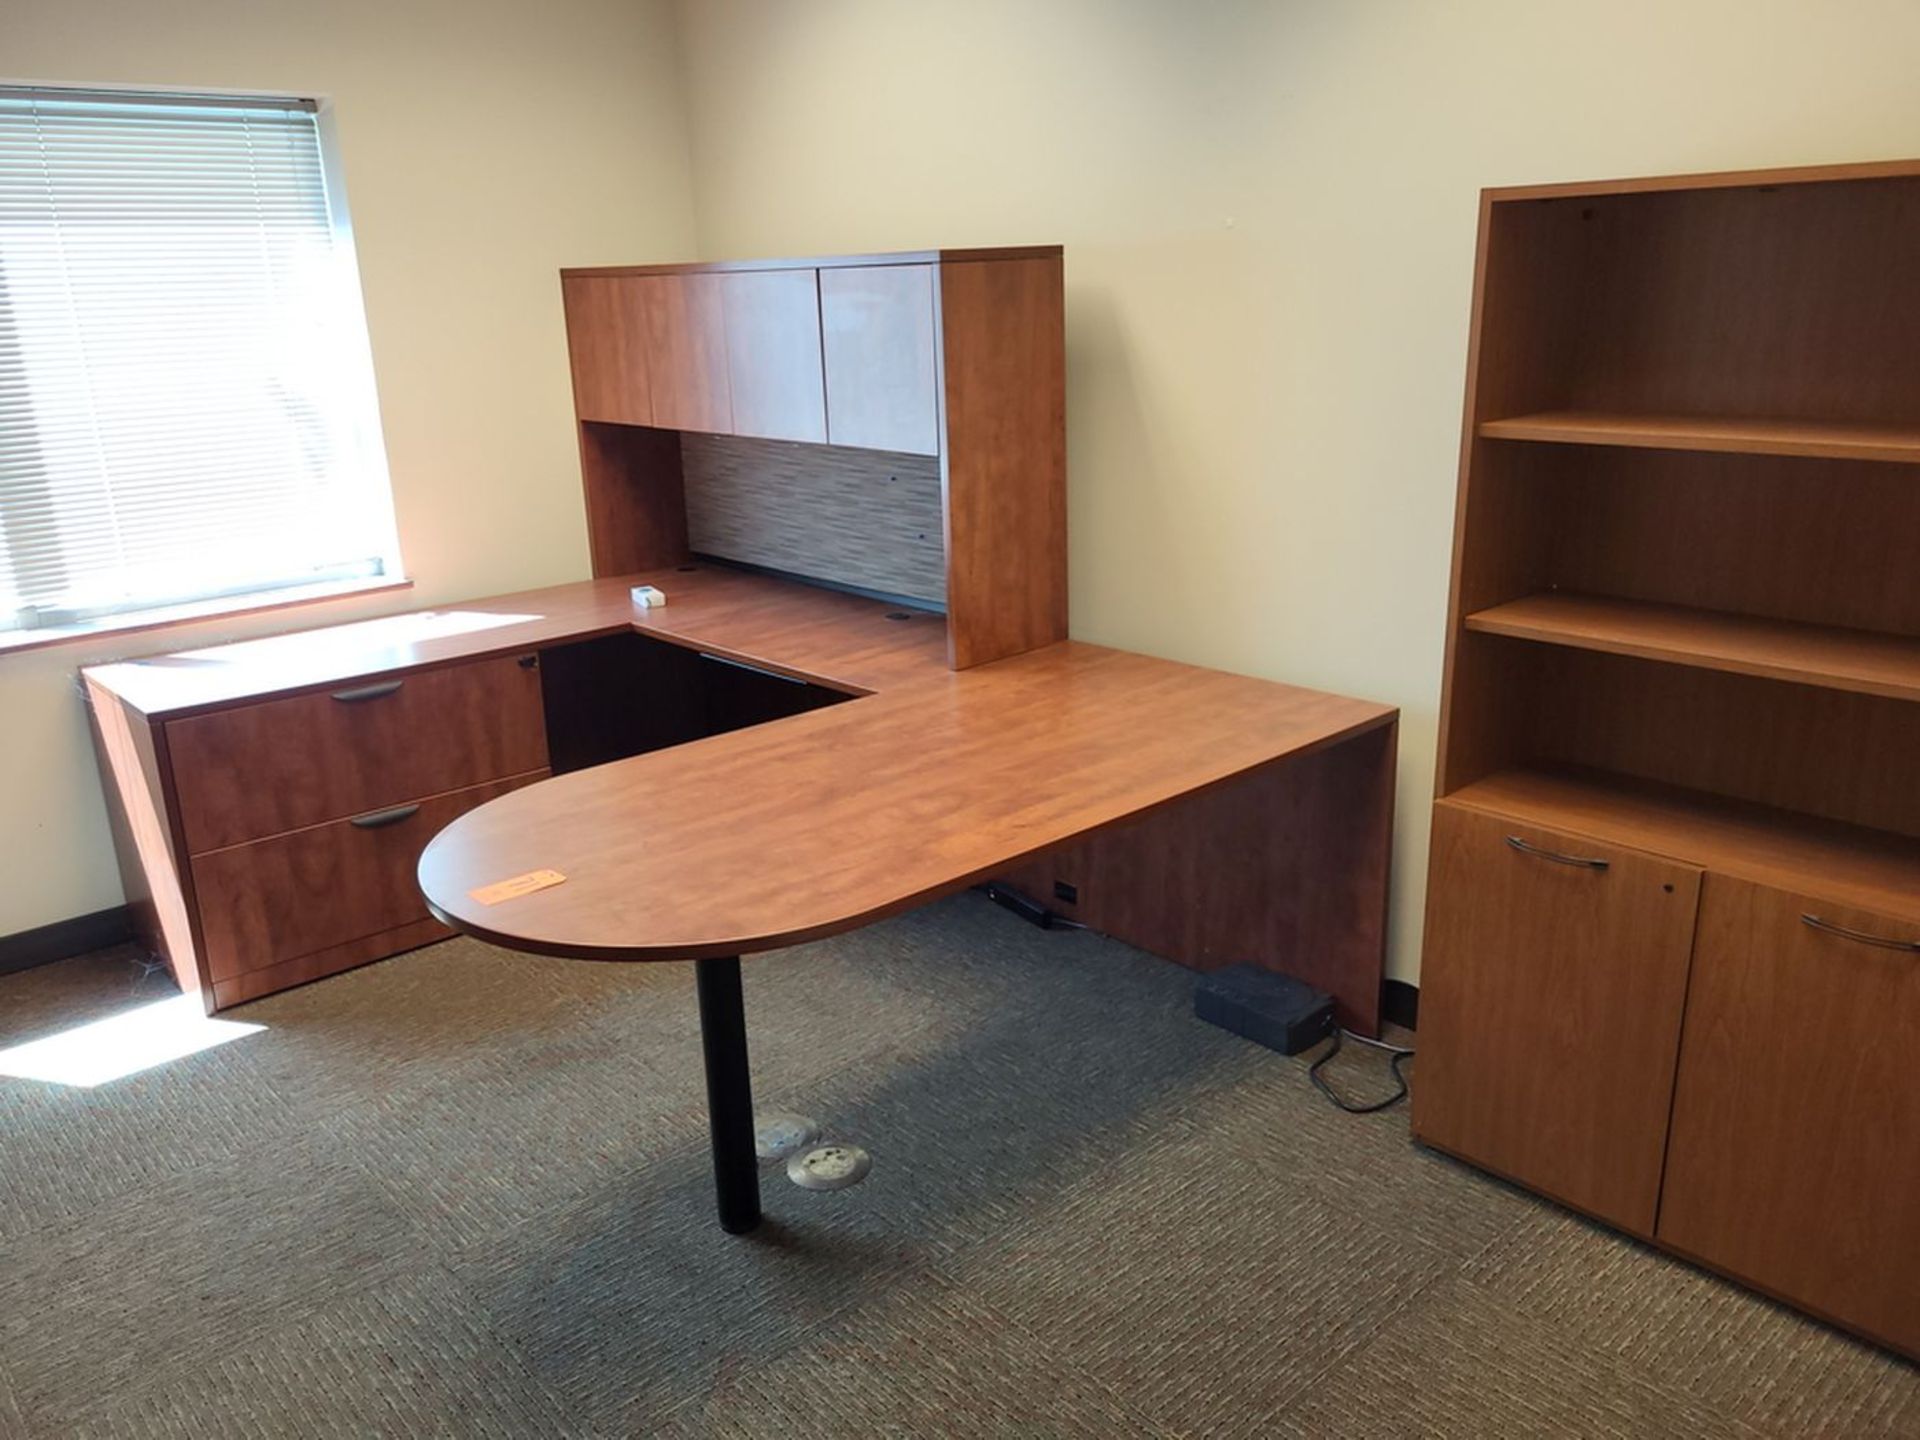 Lot - Wrap-Around Laminate Desk; with Side Cabinet (No Chair)